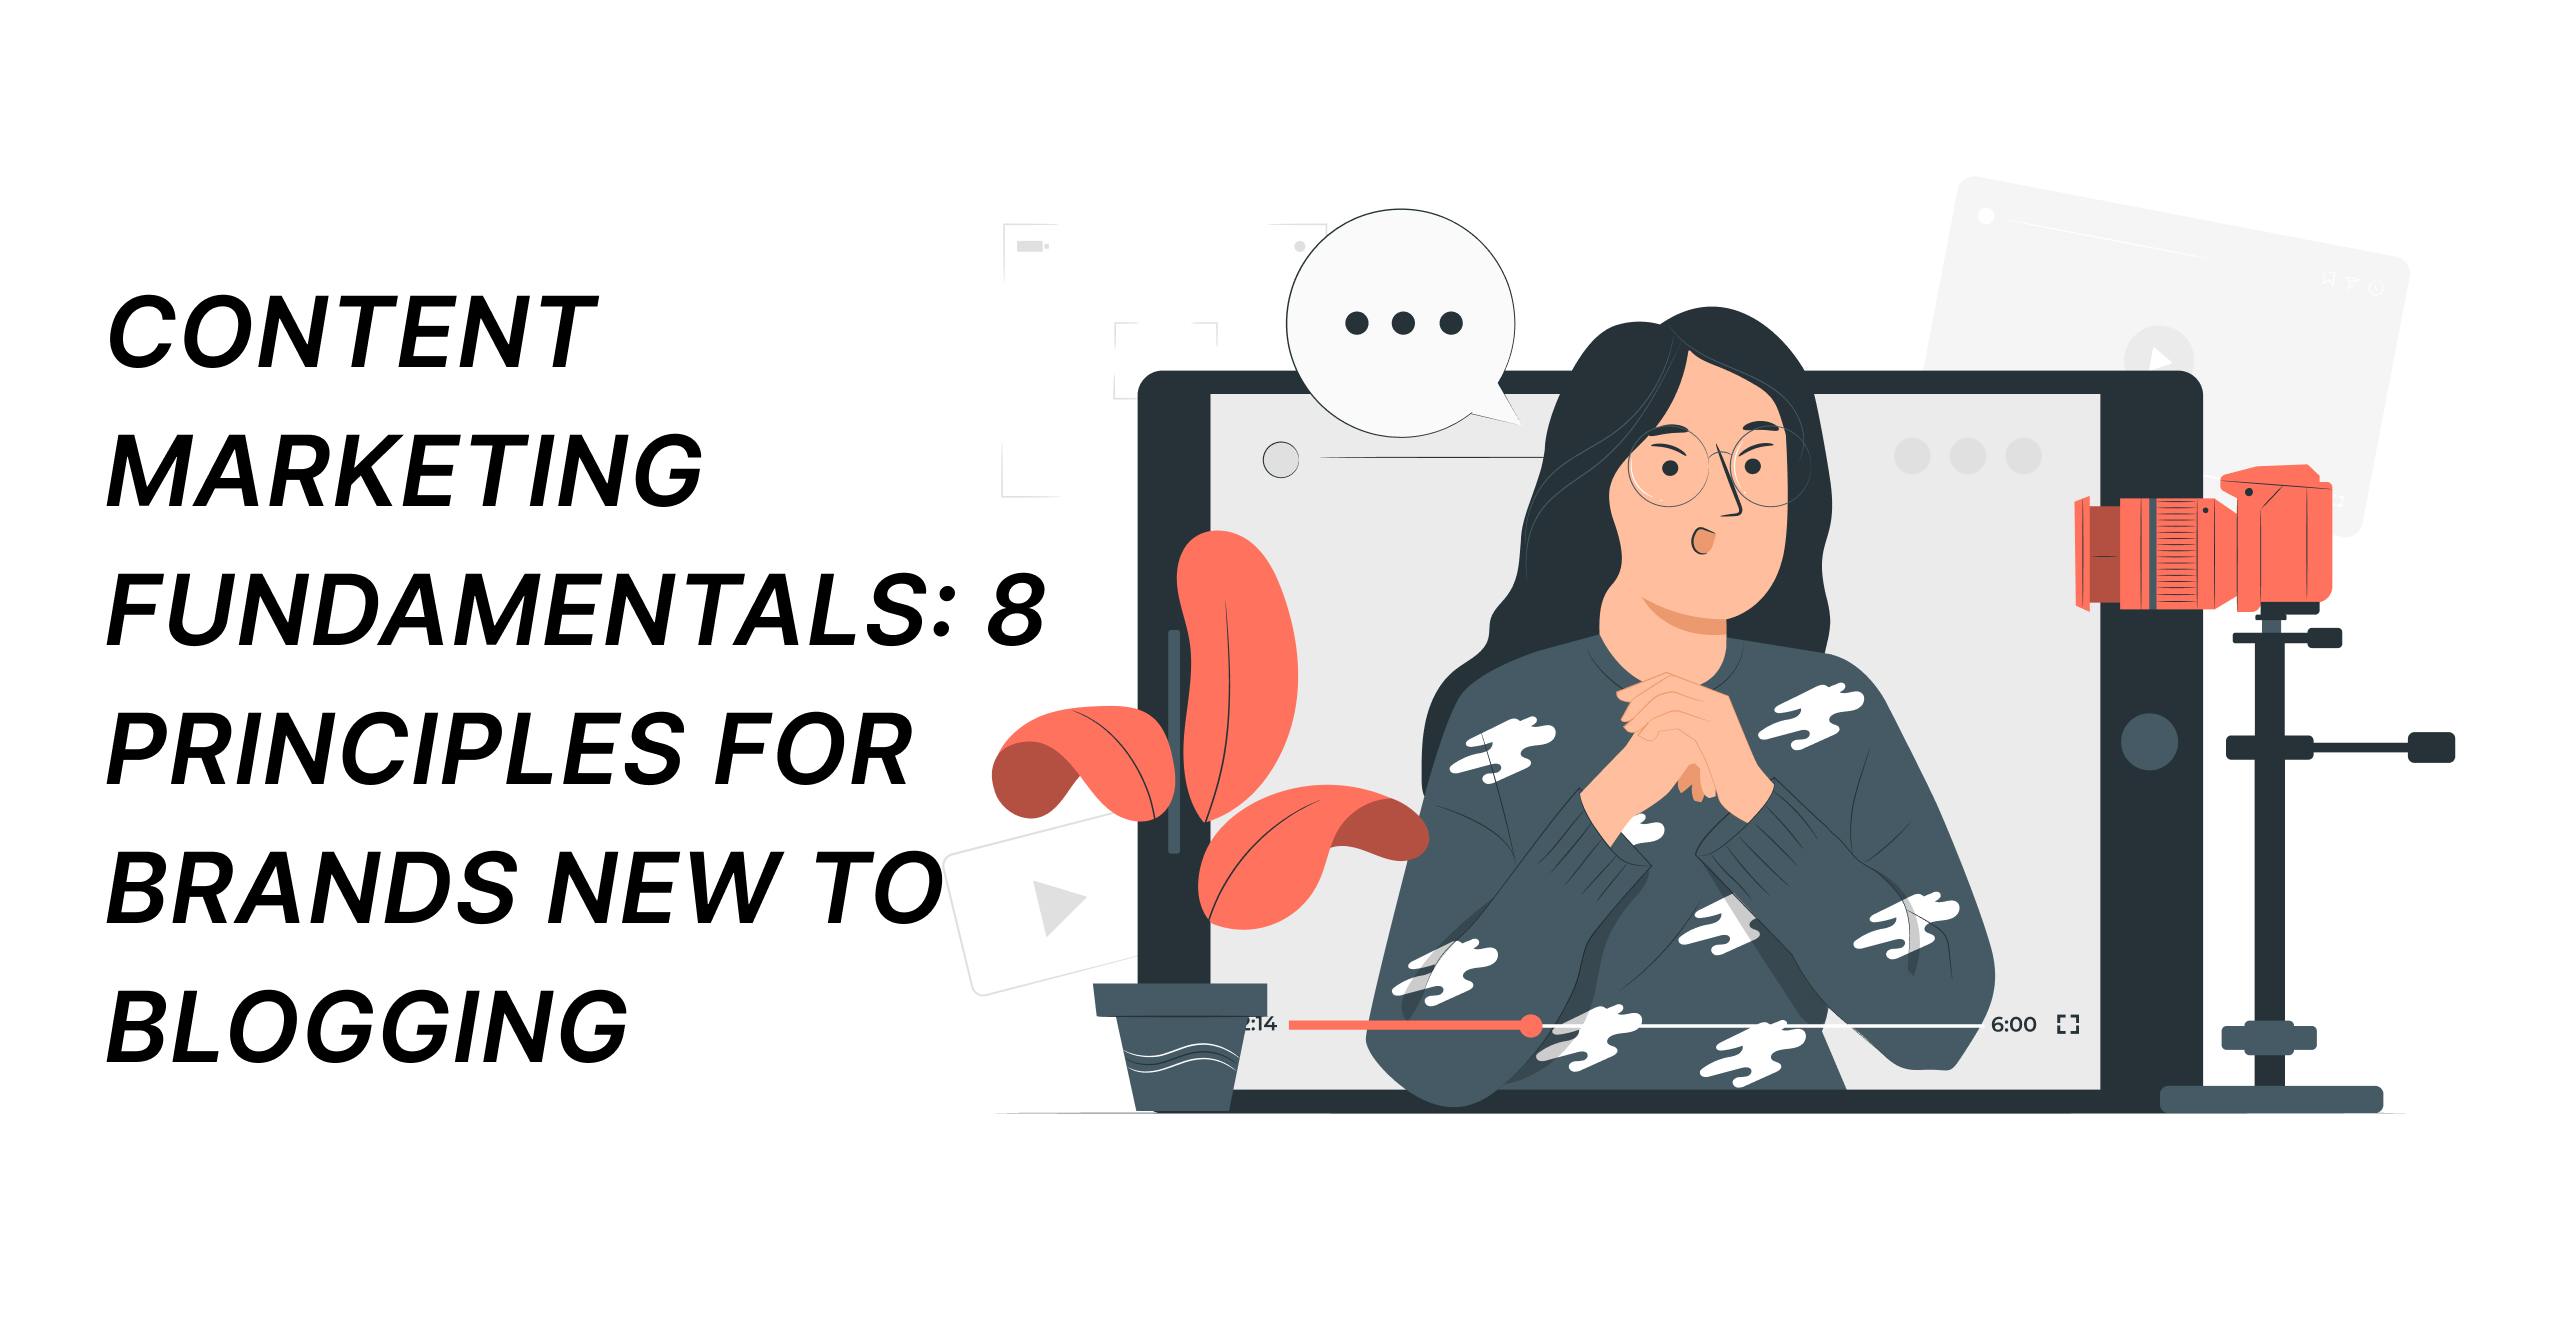 Content Marketing Fundamentals: 8 Principles for Brands New to Blogging